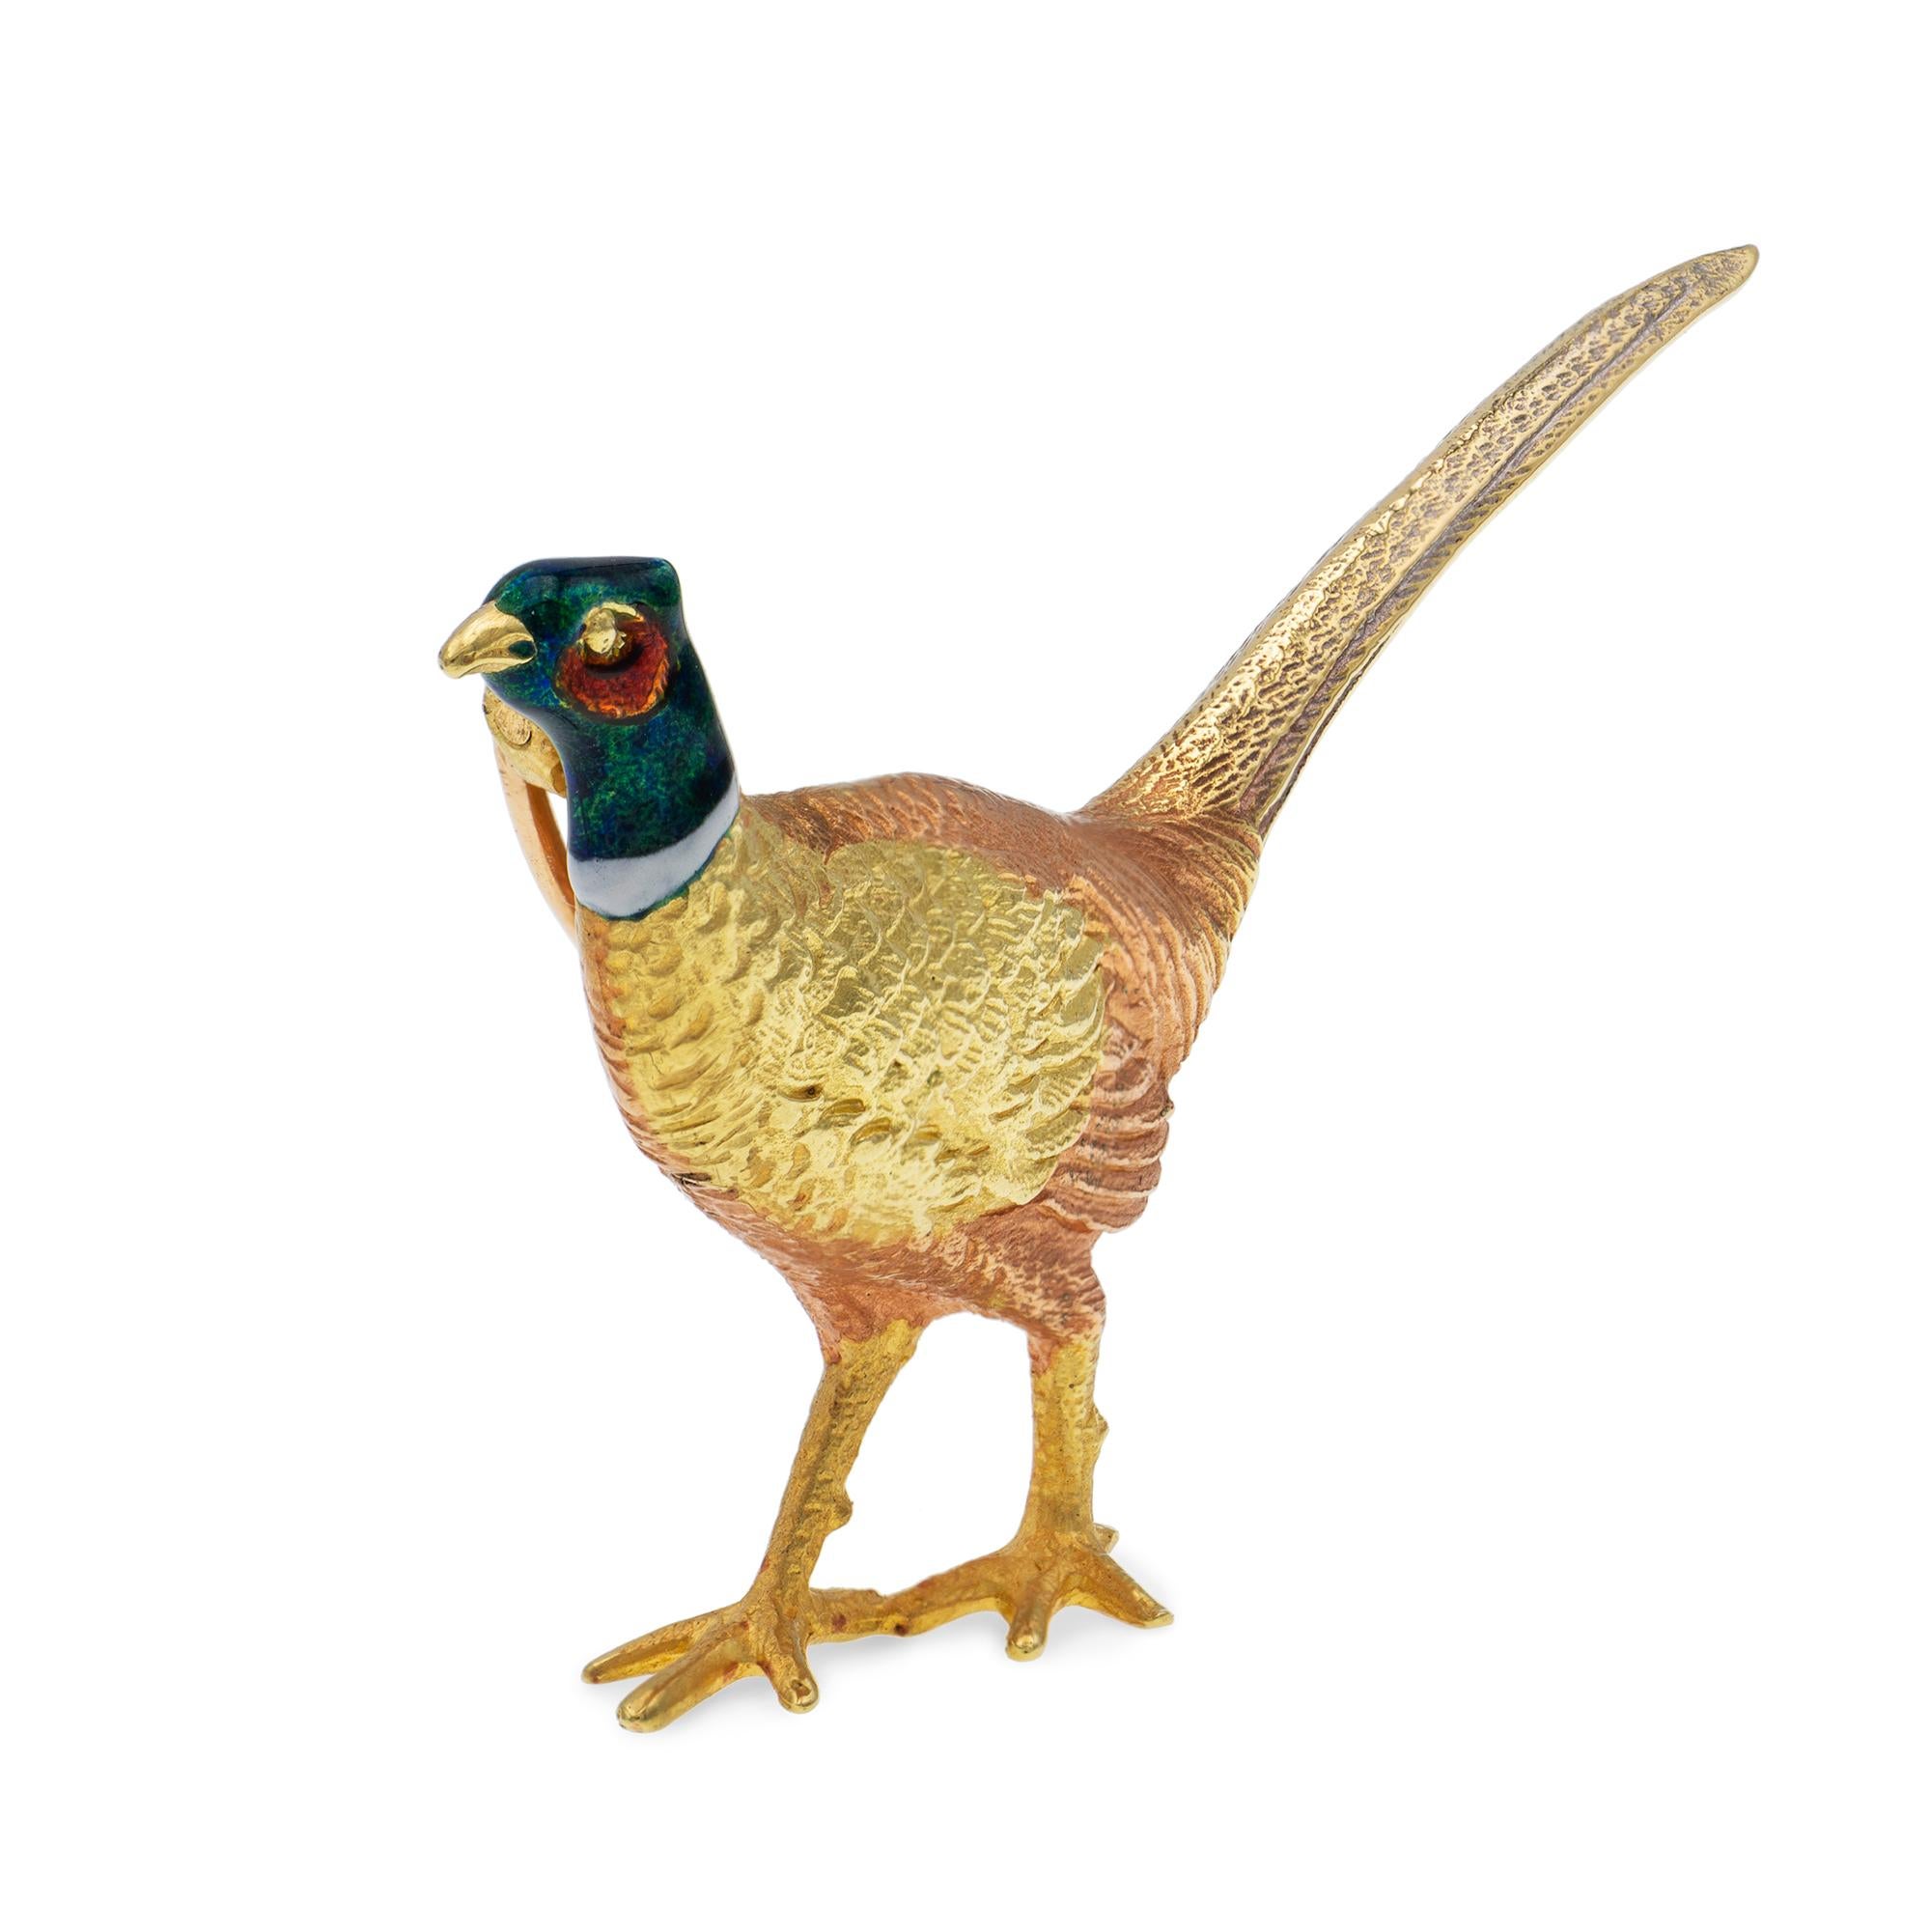 An enamel and gold pheasant brooch, depicting the adult male ring-necked pheasant, the body is realistically carved and made in rose and yellow gold with an enamelled head, hallmarked for 18ct gold, London 2017, bearing the Bentley & Skinner sponsor